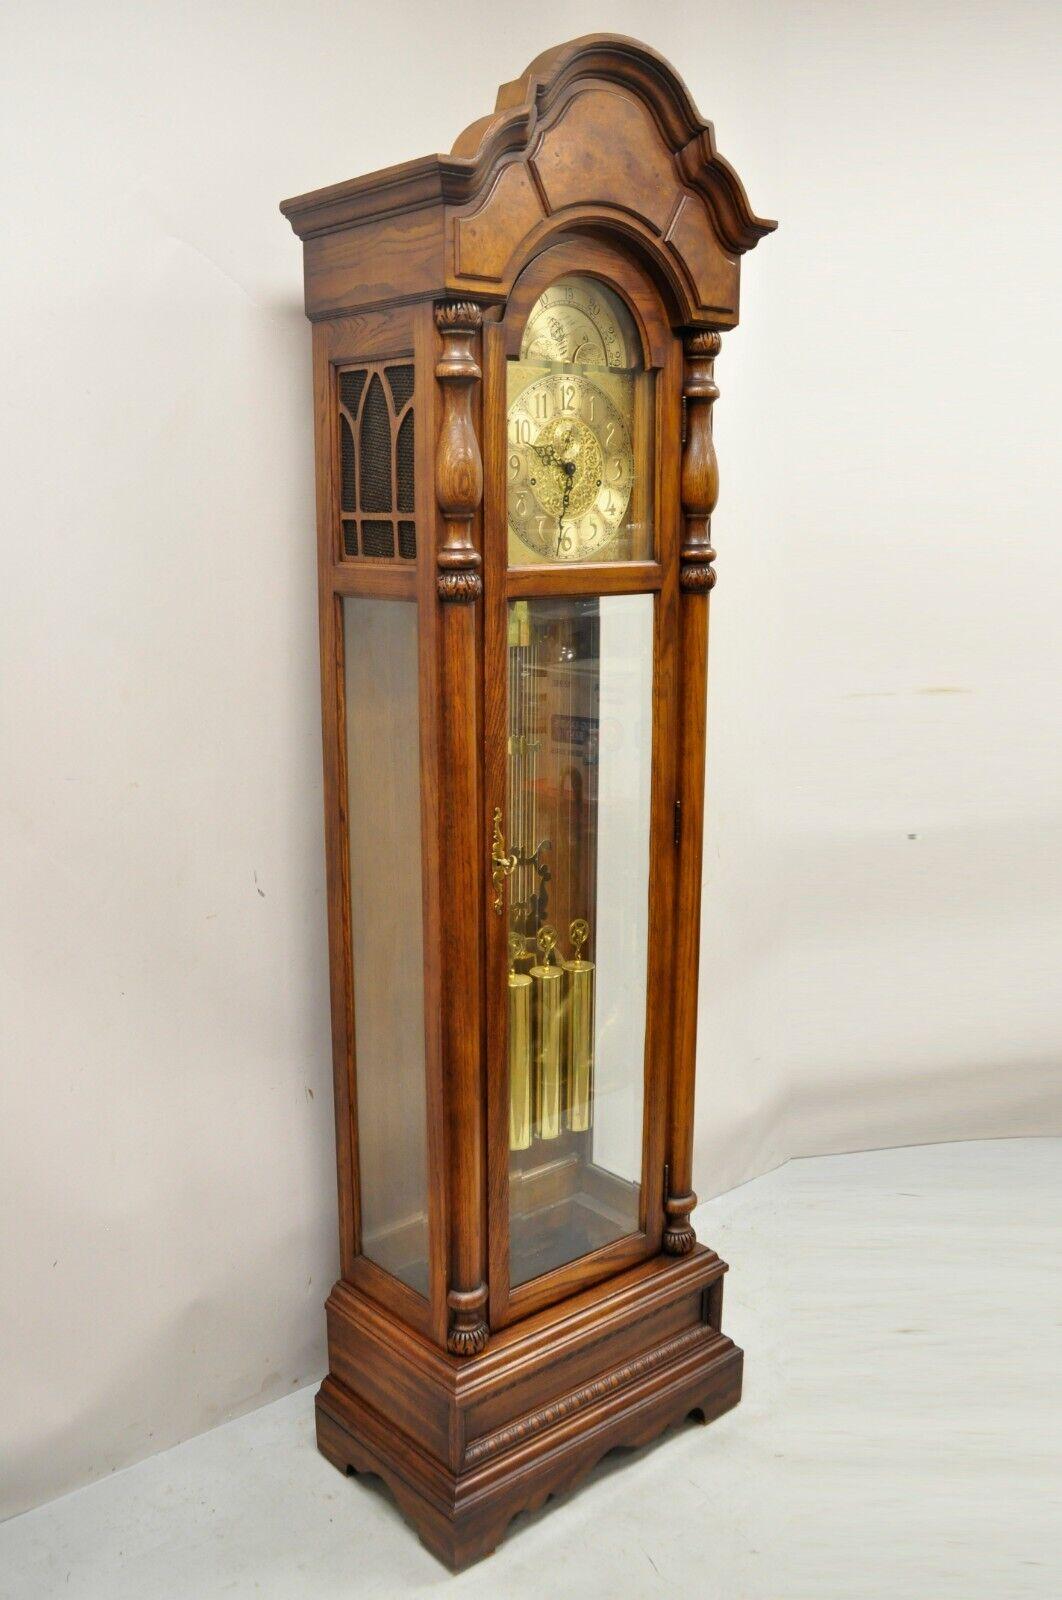 The Walden Ridge Ridgeway Grandfather Clock Oak Tall Case. Item features serial # 8206809, solid wood frame, beautiful wood grain, quality American craftsmanship, great style and form, brass plaque reads 